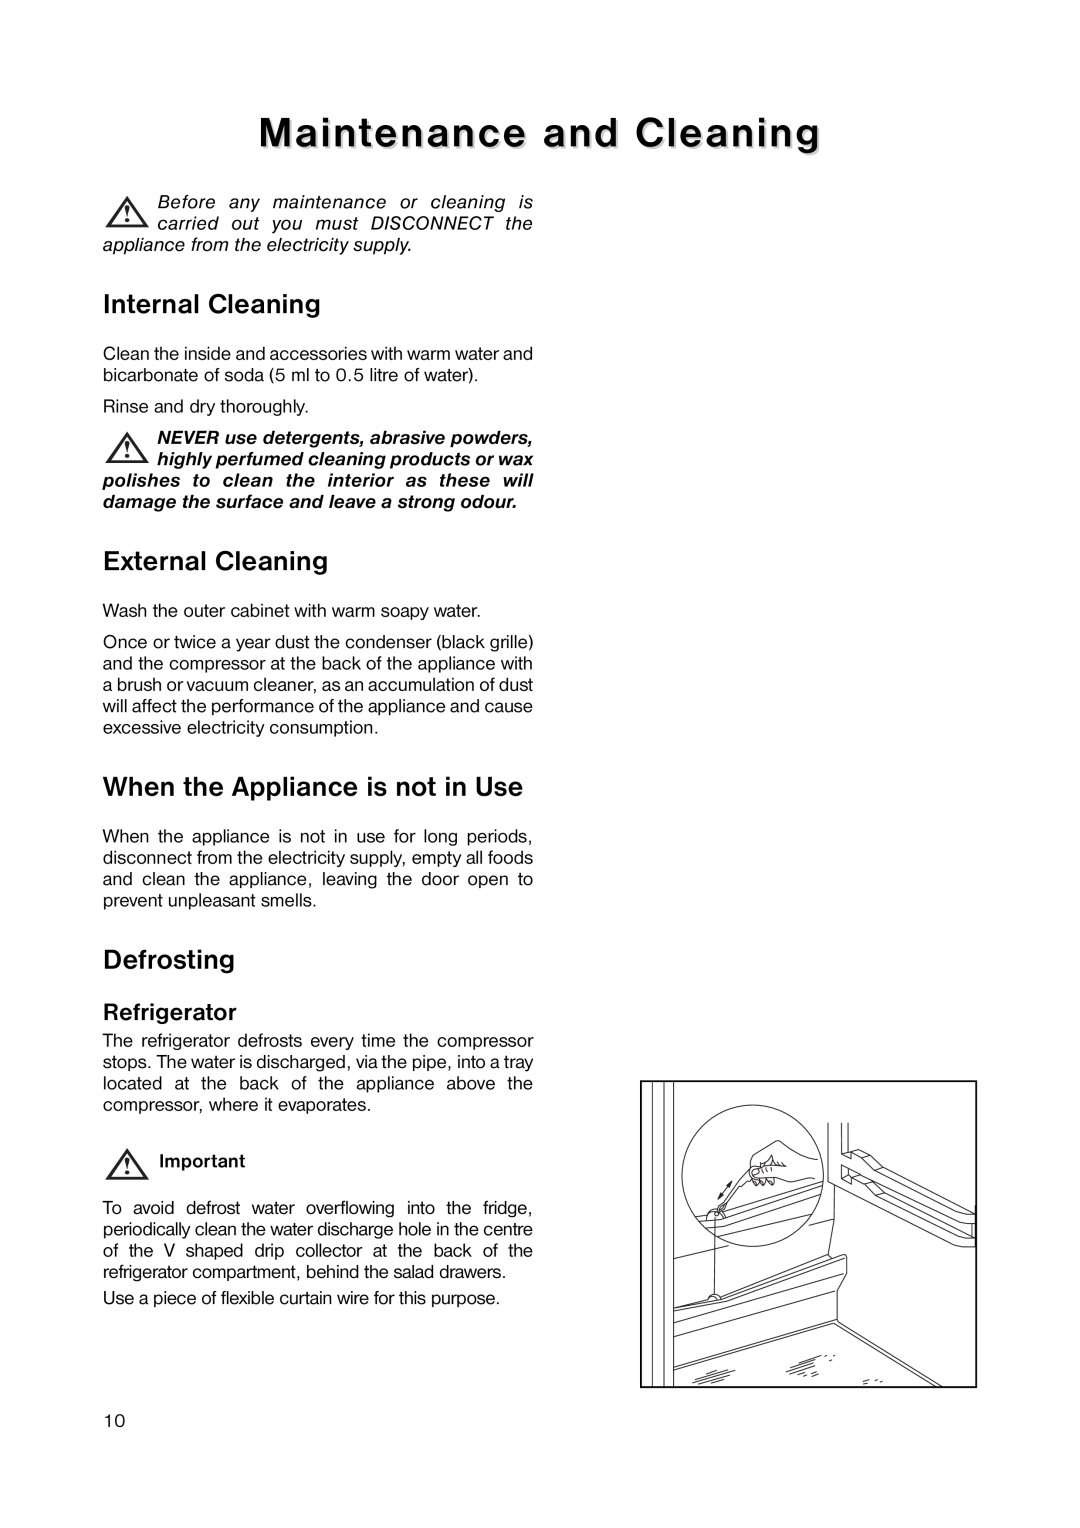 Zanussi ZRB 2641 manual Maintenance and Cleaning, Internal Cleaning, External Cleaning, When the Appliance is not in Use 